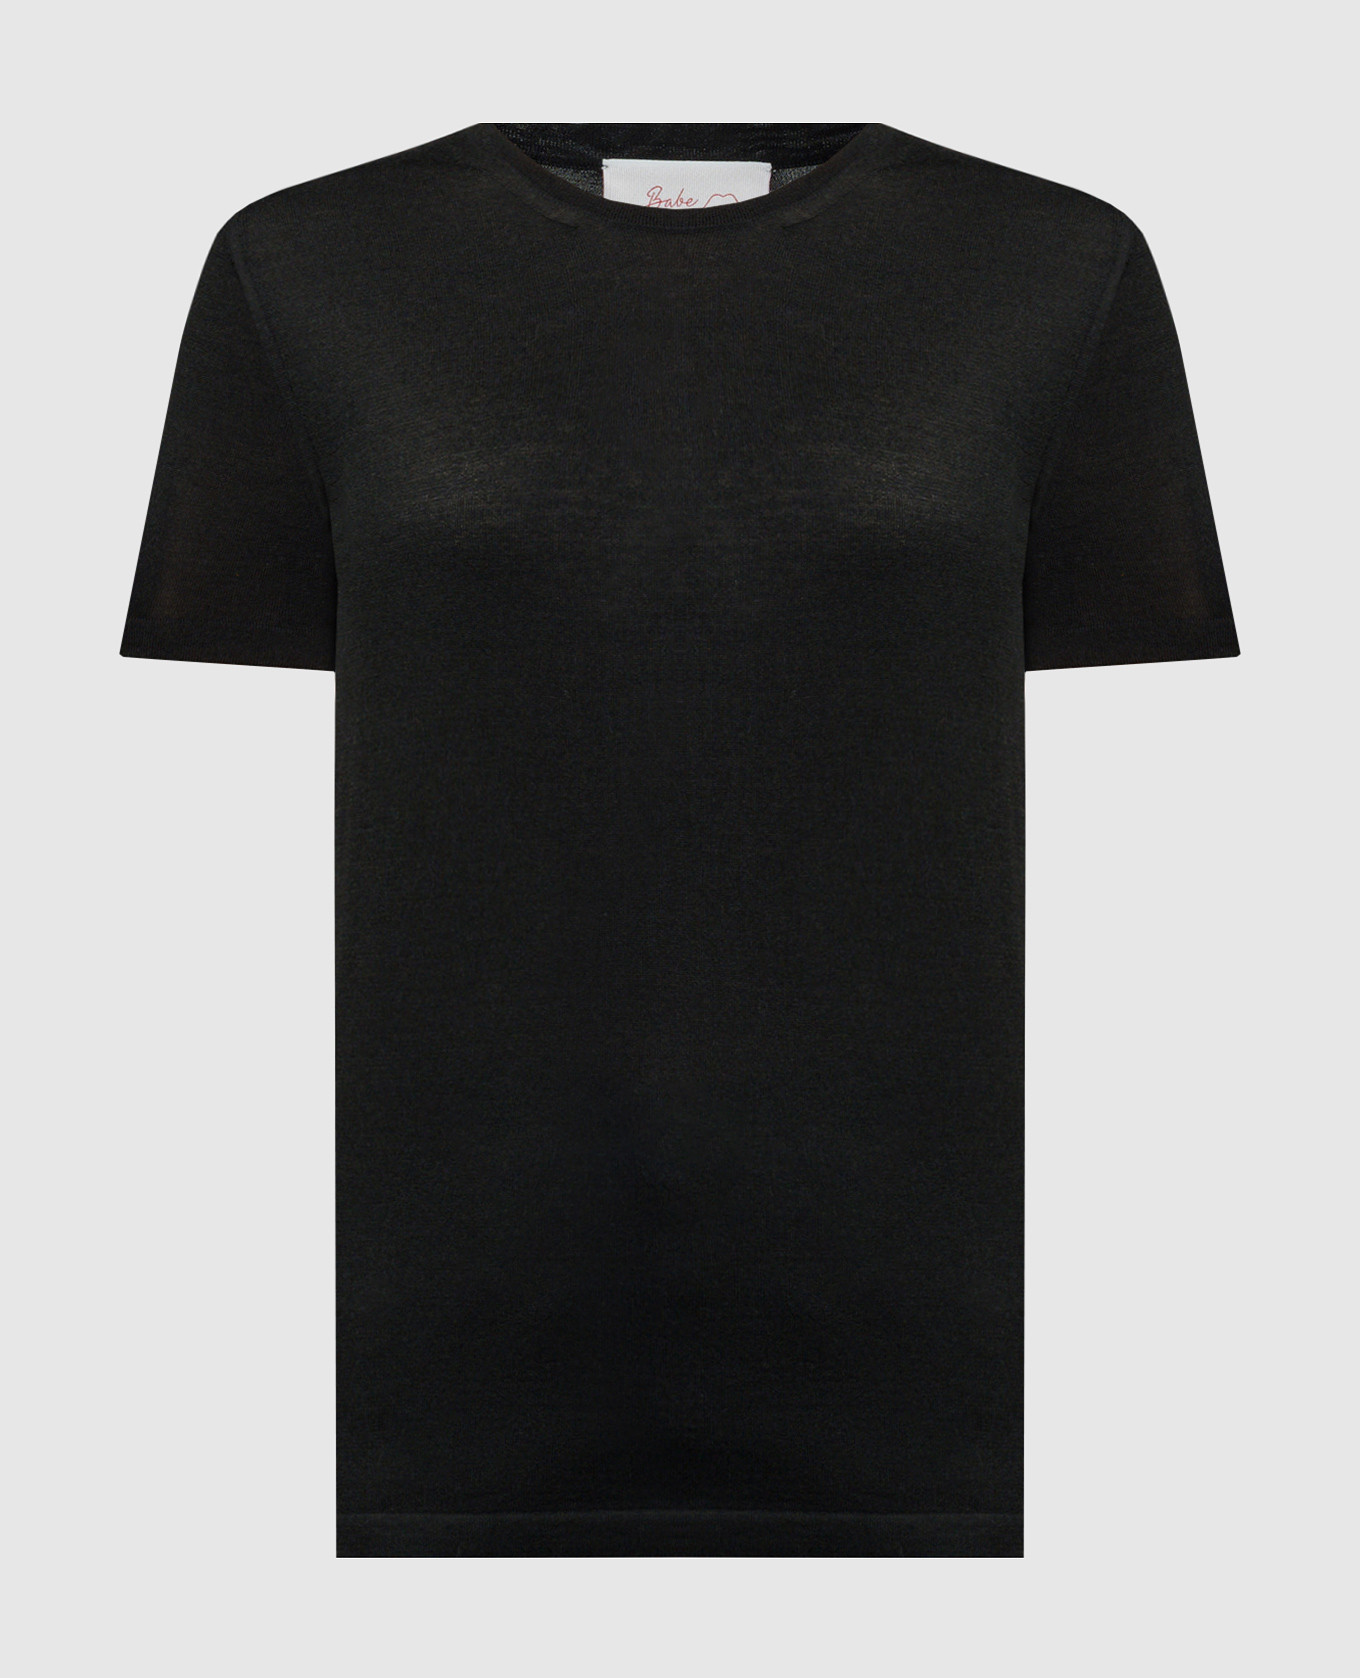 Black T-shirt made of wool, silk and cashmere